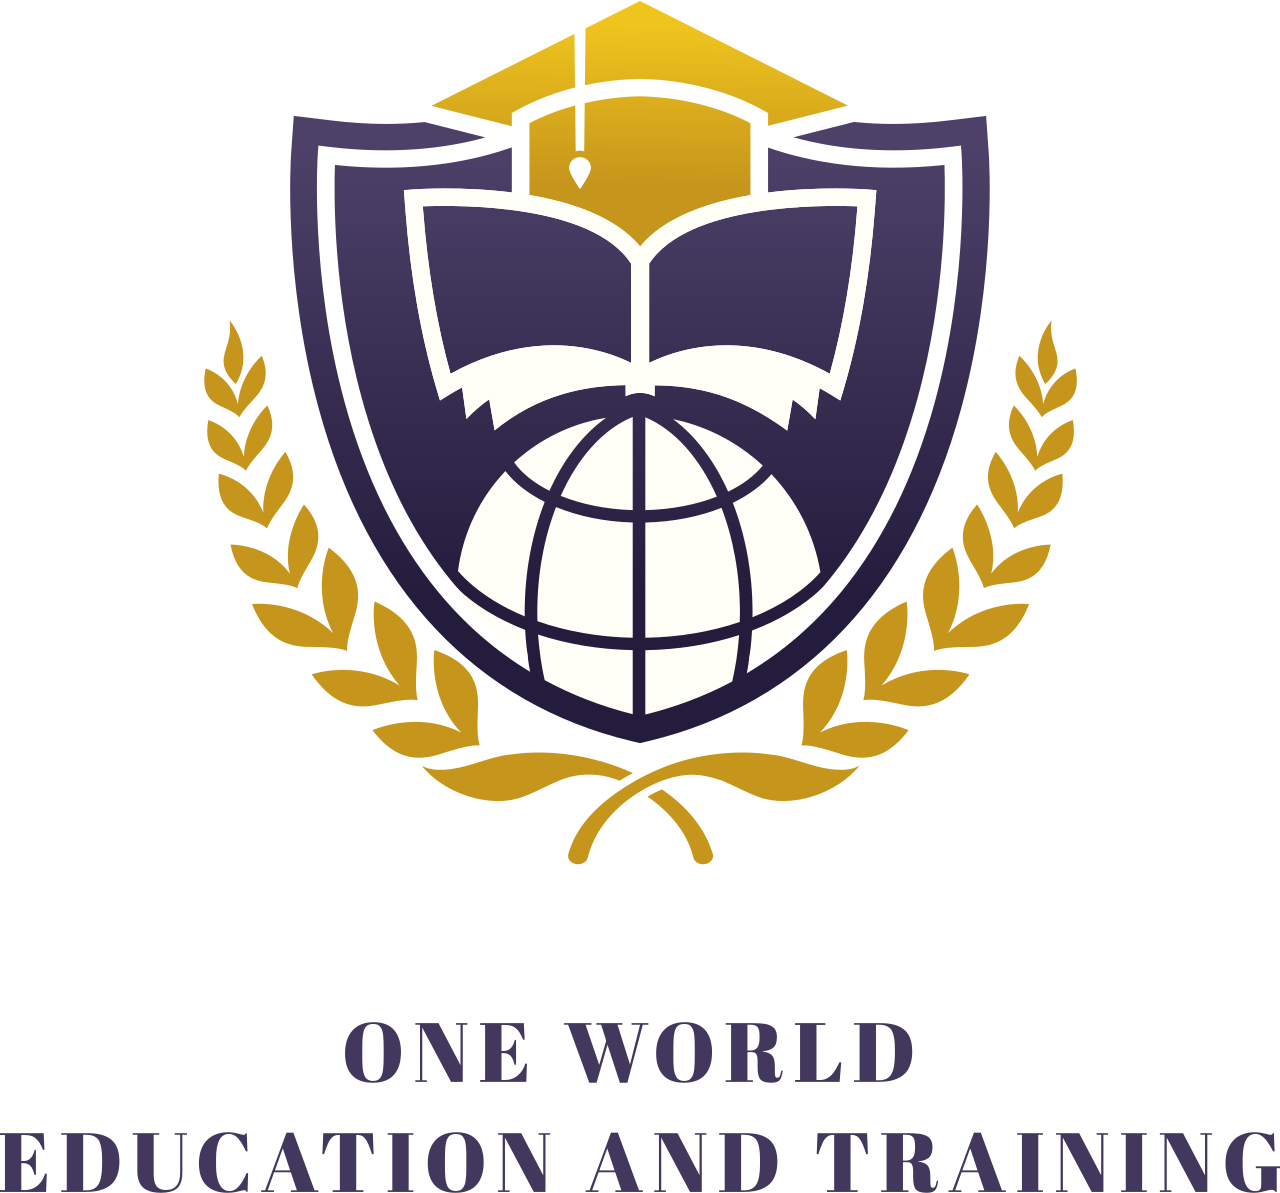 One world 
Education and Training's web page